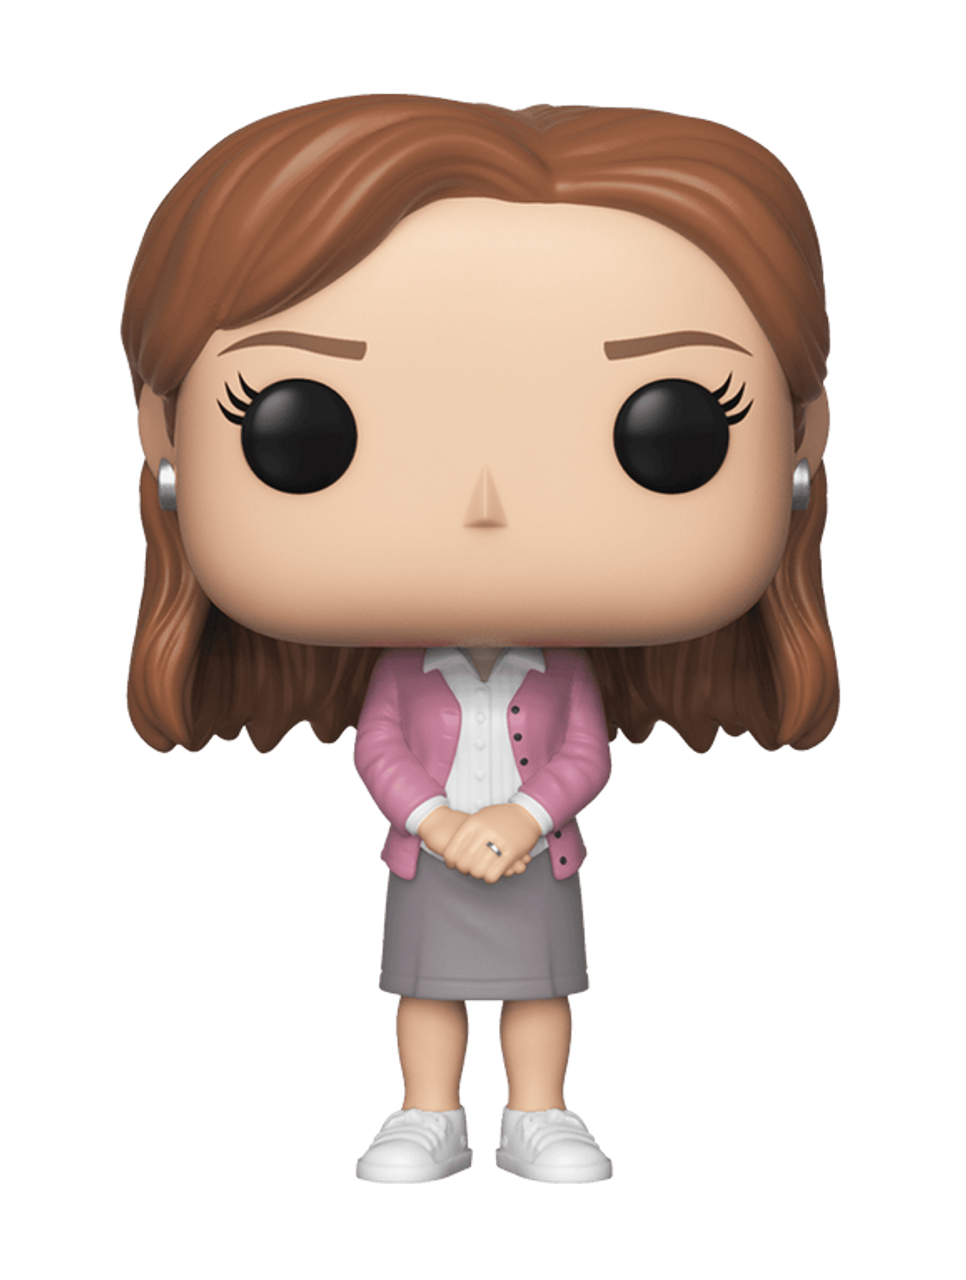 Funko Pop! Television: The Office Pam Beesly